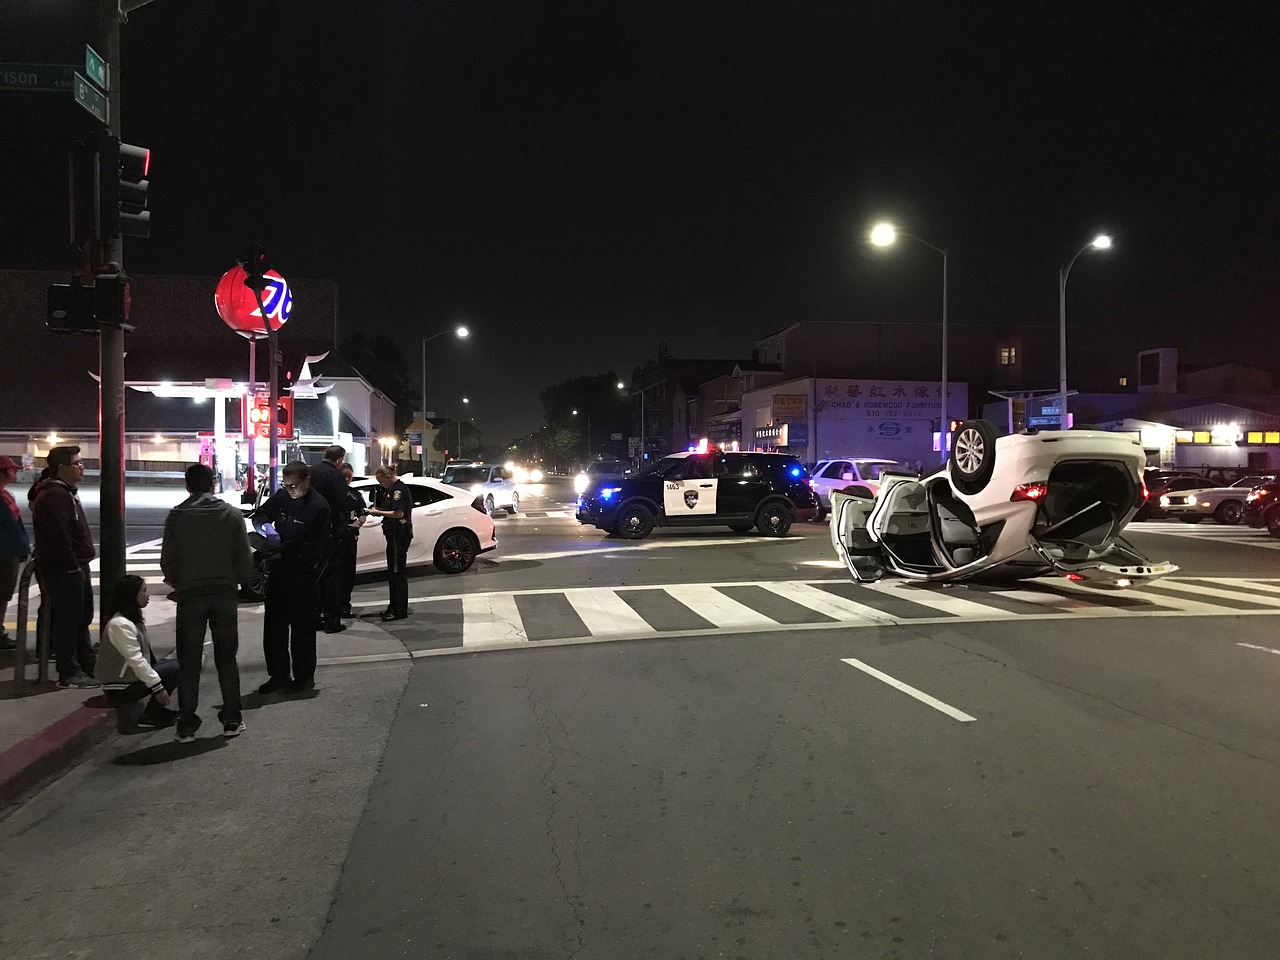 Car accident on city street at night.